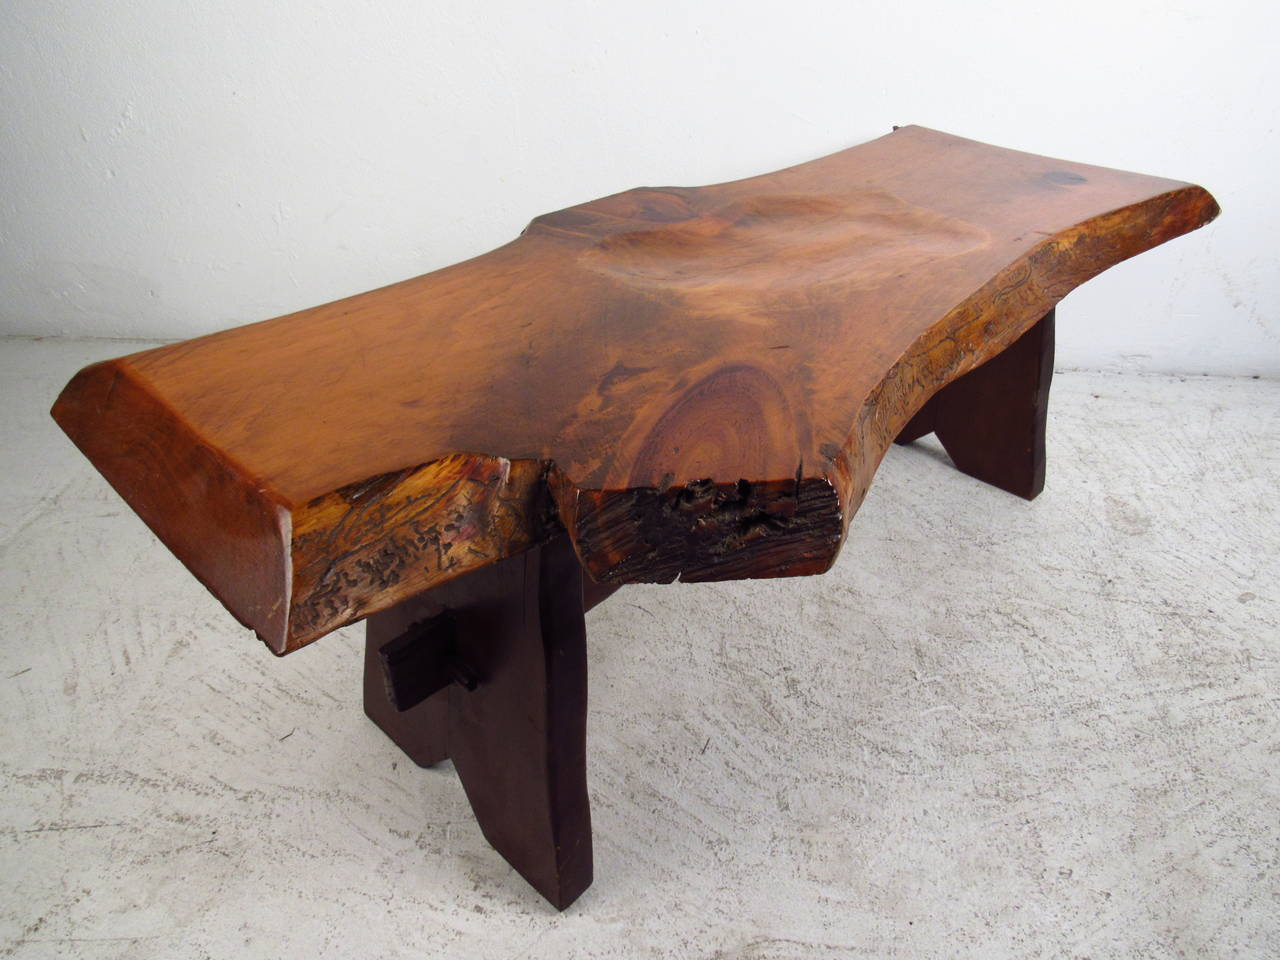 This live edge slab bench features a one of a kind top cut from a tree which offers a rustic accent to any home or office.

Please confirm item location (NY or NJ) with dealer. 